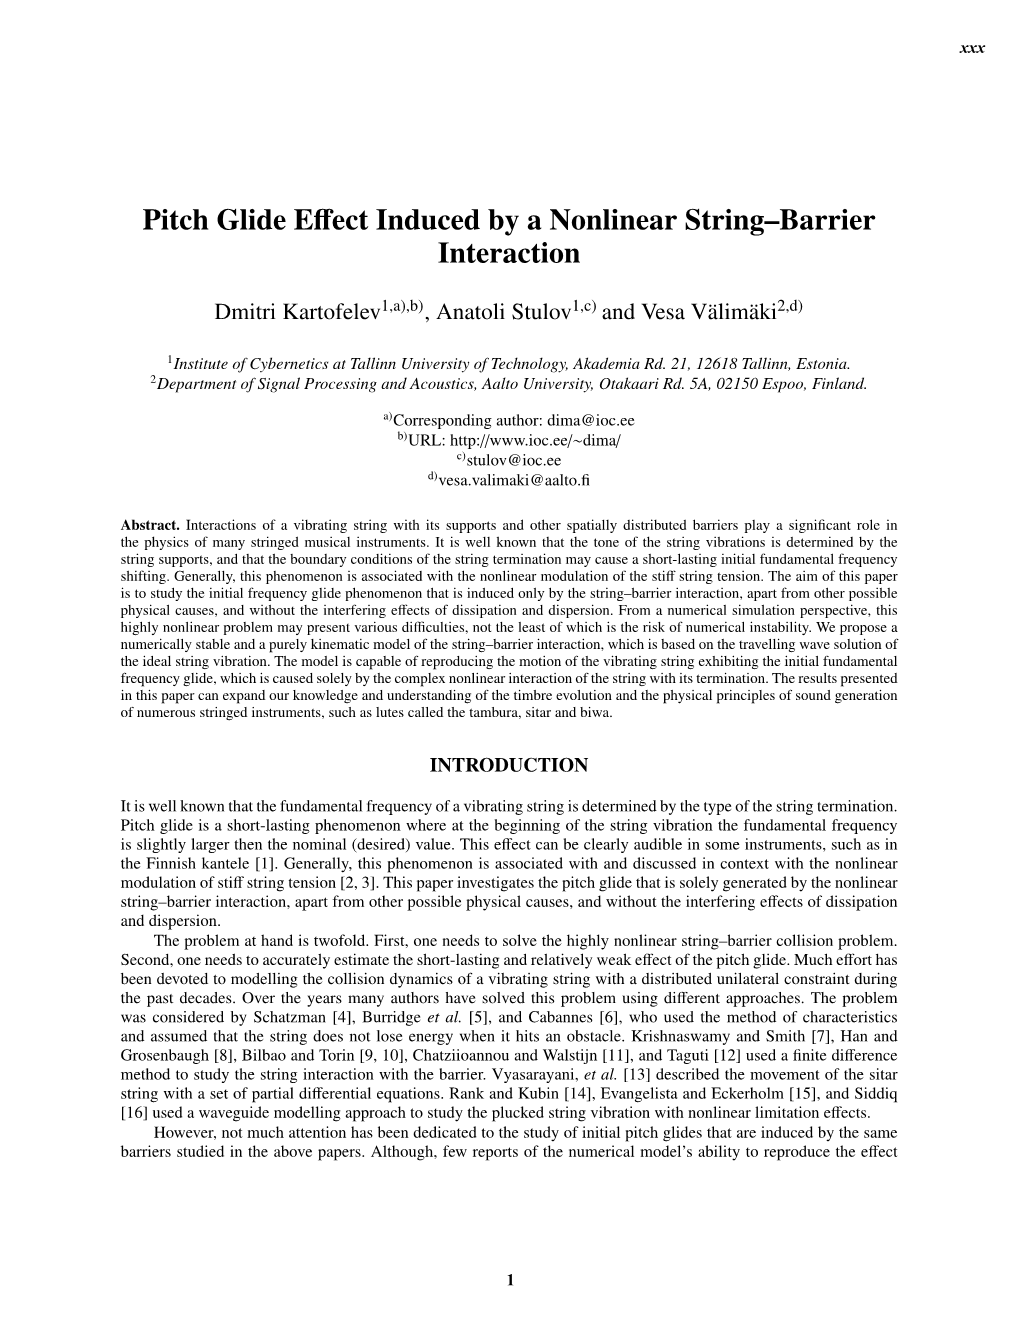 Pitch Glide Effect Induced by a Nonlinear String–Barrier Interaction